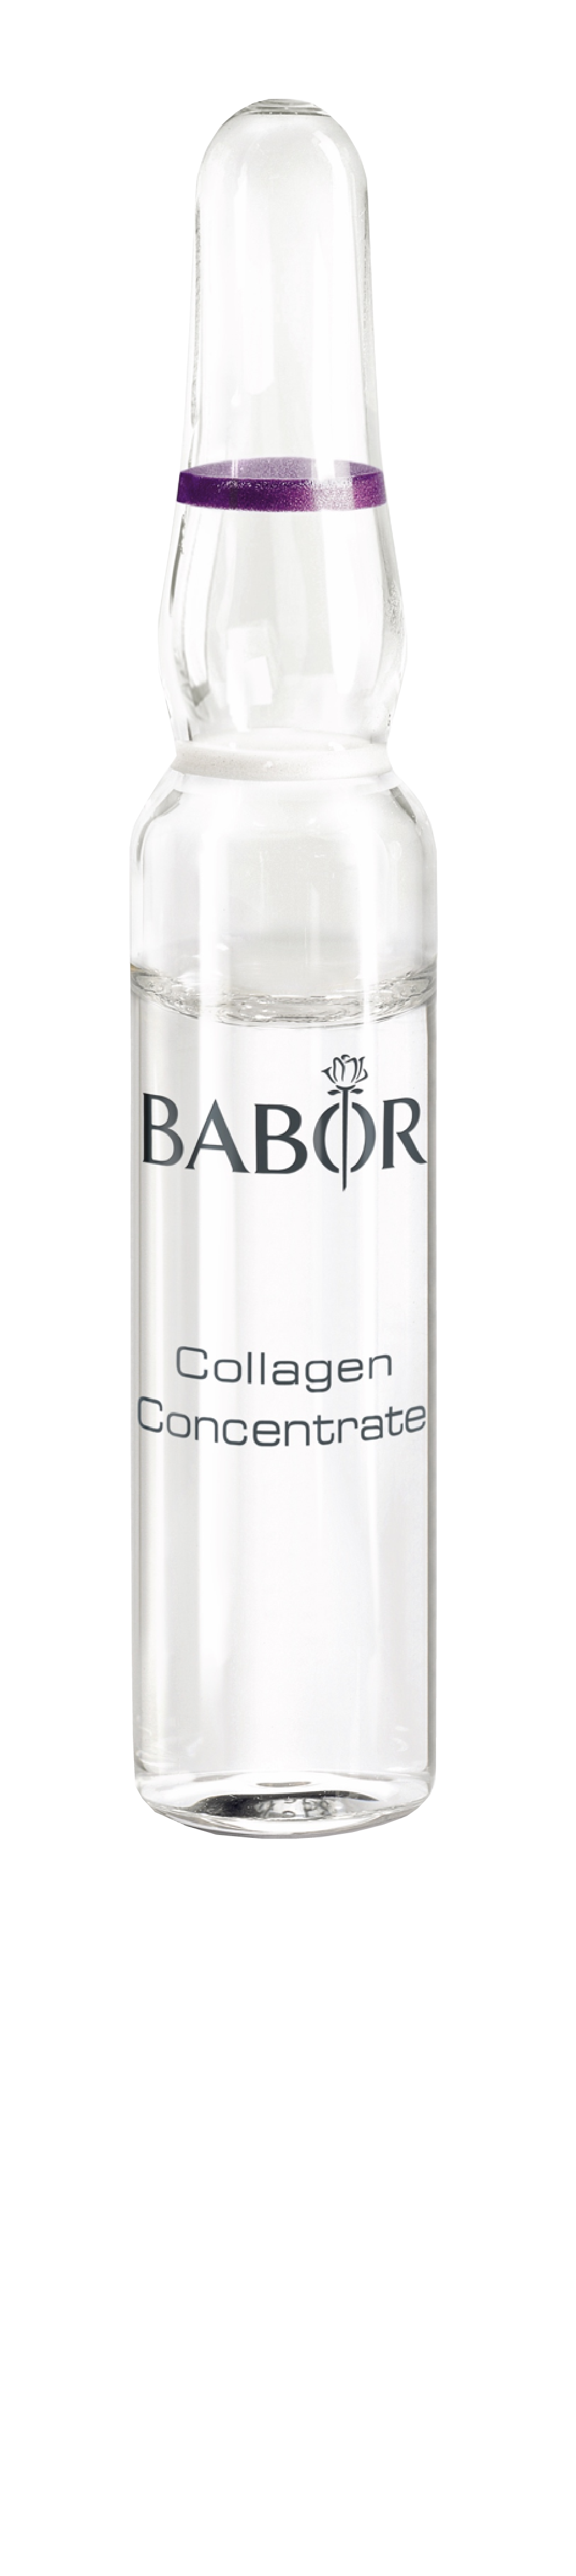 Concentrated skincare booster with Tripeptides that help firm, smooth, and tone the skin’s surface with plumping hydration.